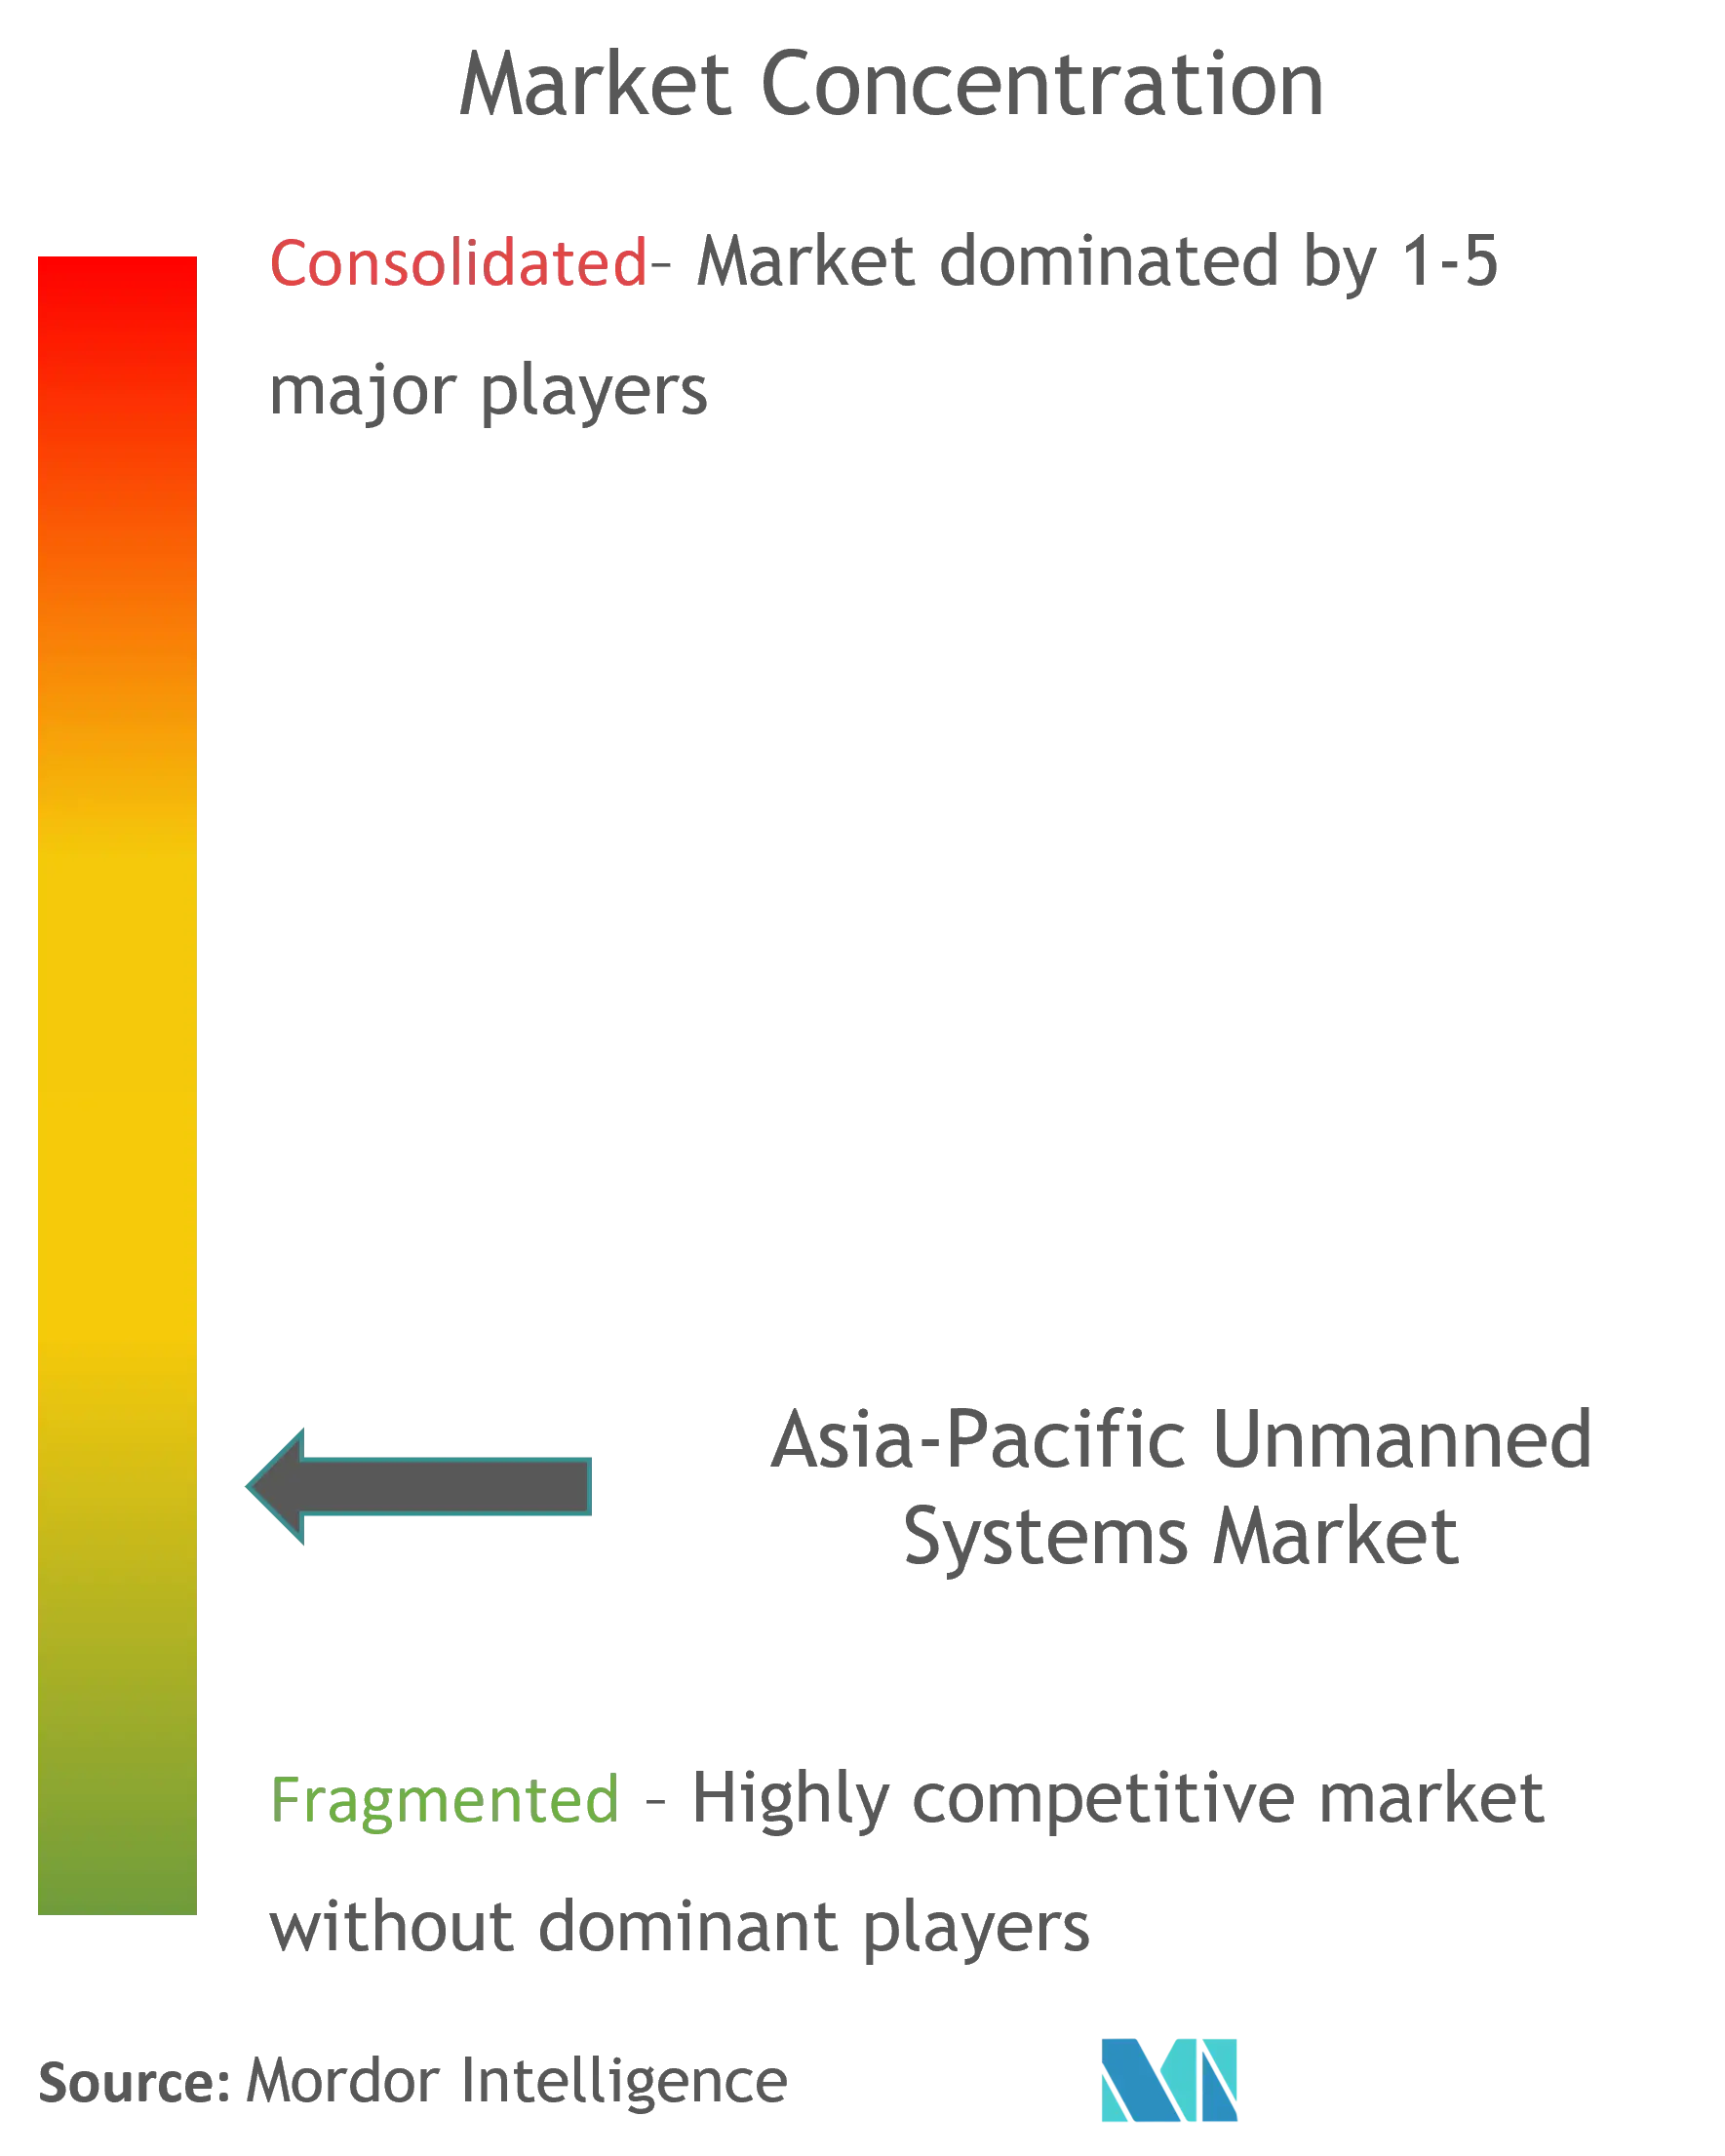 asia-pacific unmanned systems market CL.png